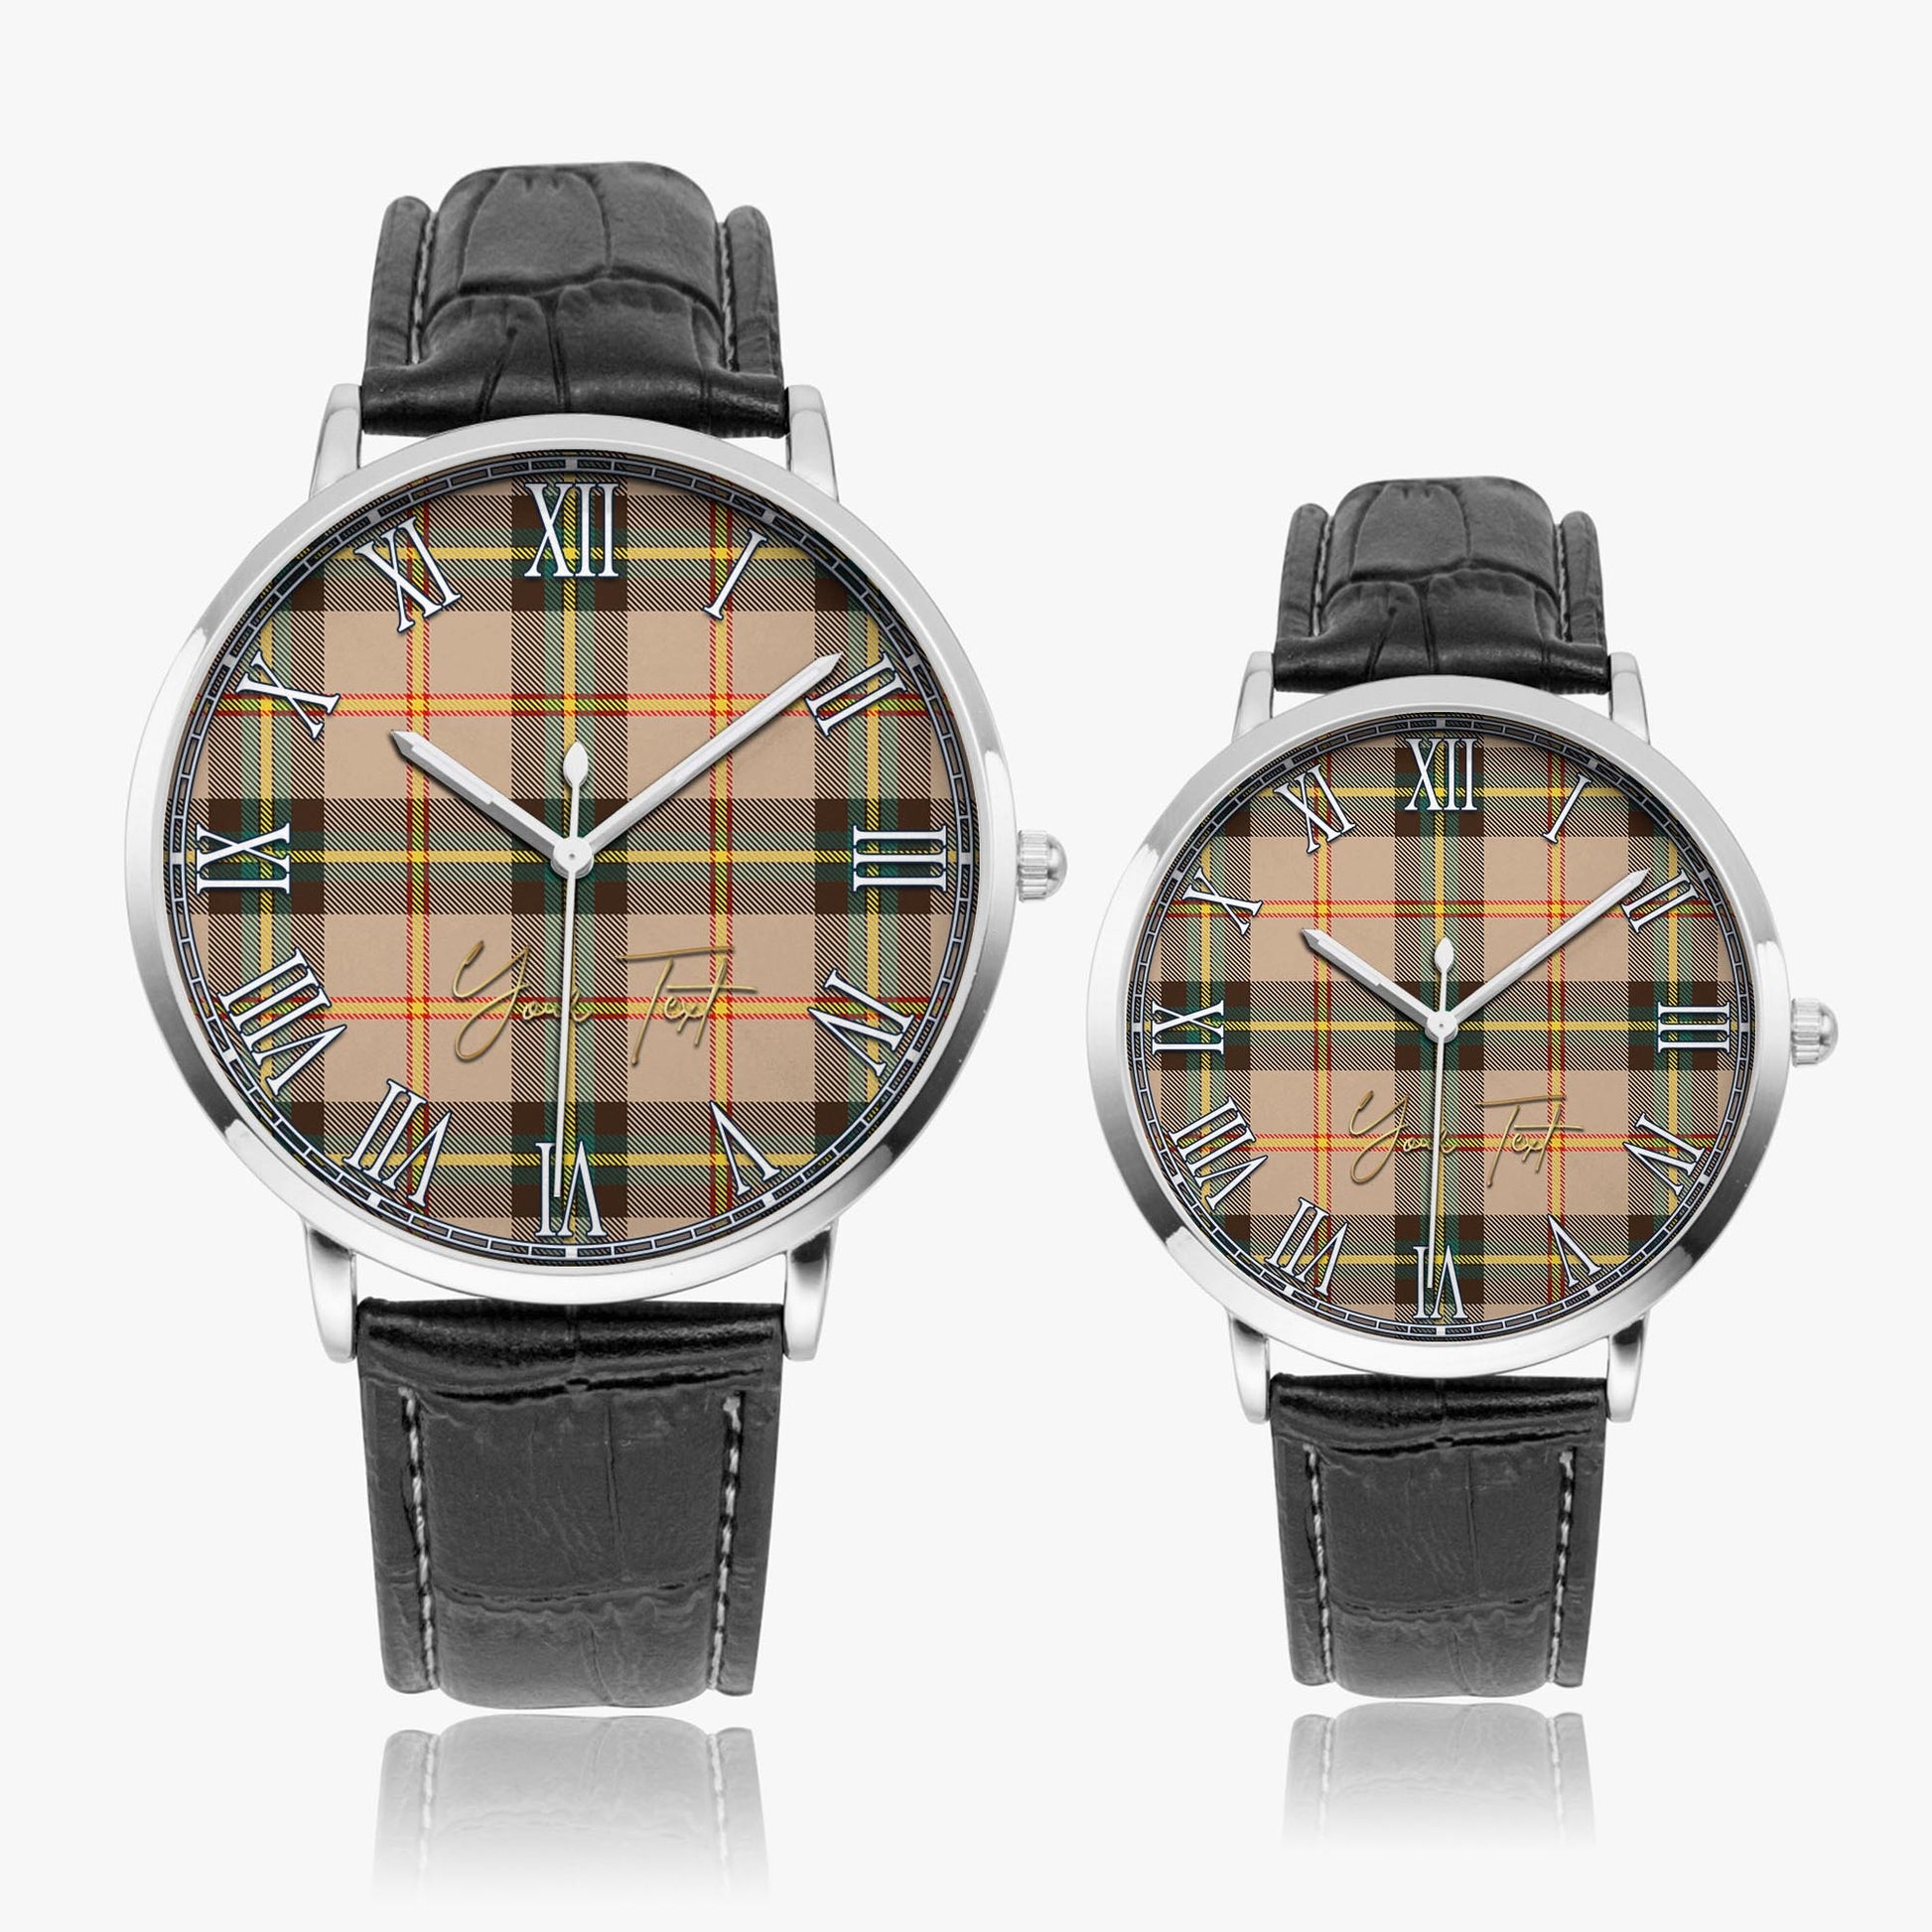 Saskatchewan Province Canada Tartan Personalized Your Text Leather Trap Quartz Watch Ultra Thin Silver Case With Black Leather Strap - Tartanvibesclothing